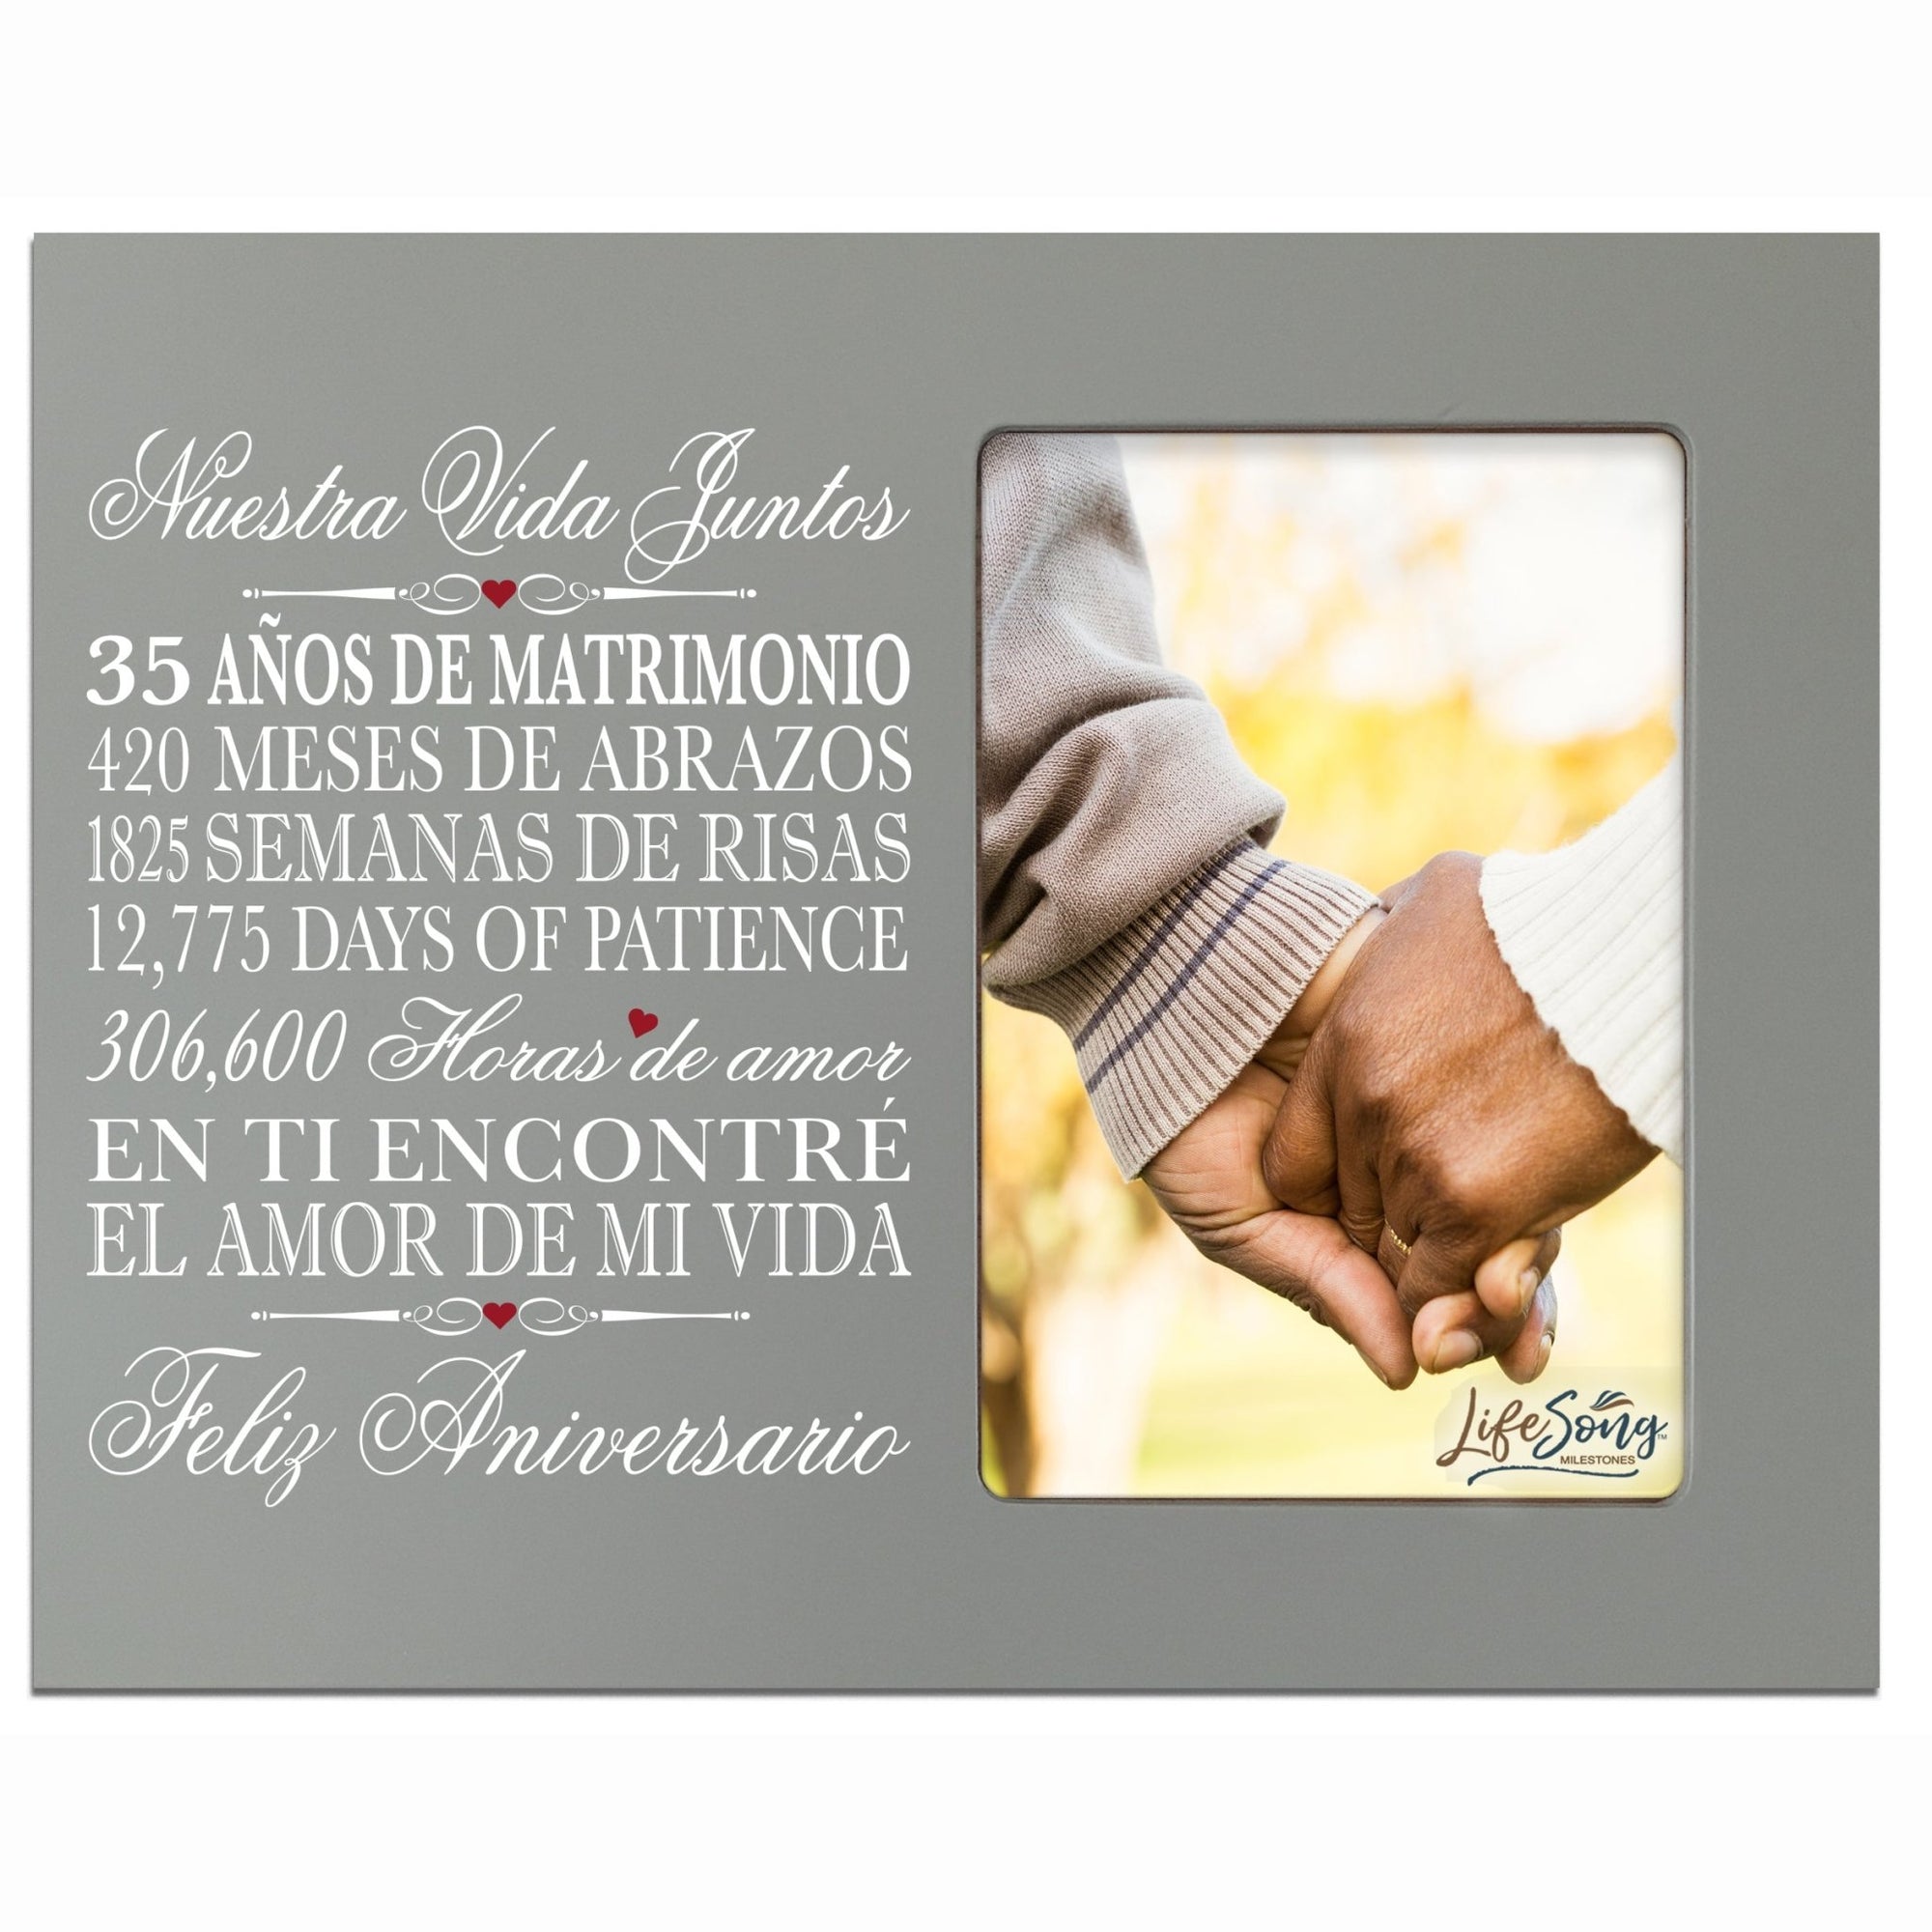 Unique 35th Wedding Anniversary Gift Ideas for Couples – Spanish-themed frame.